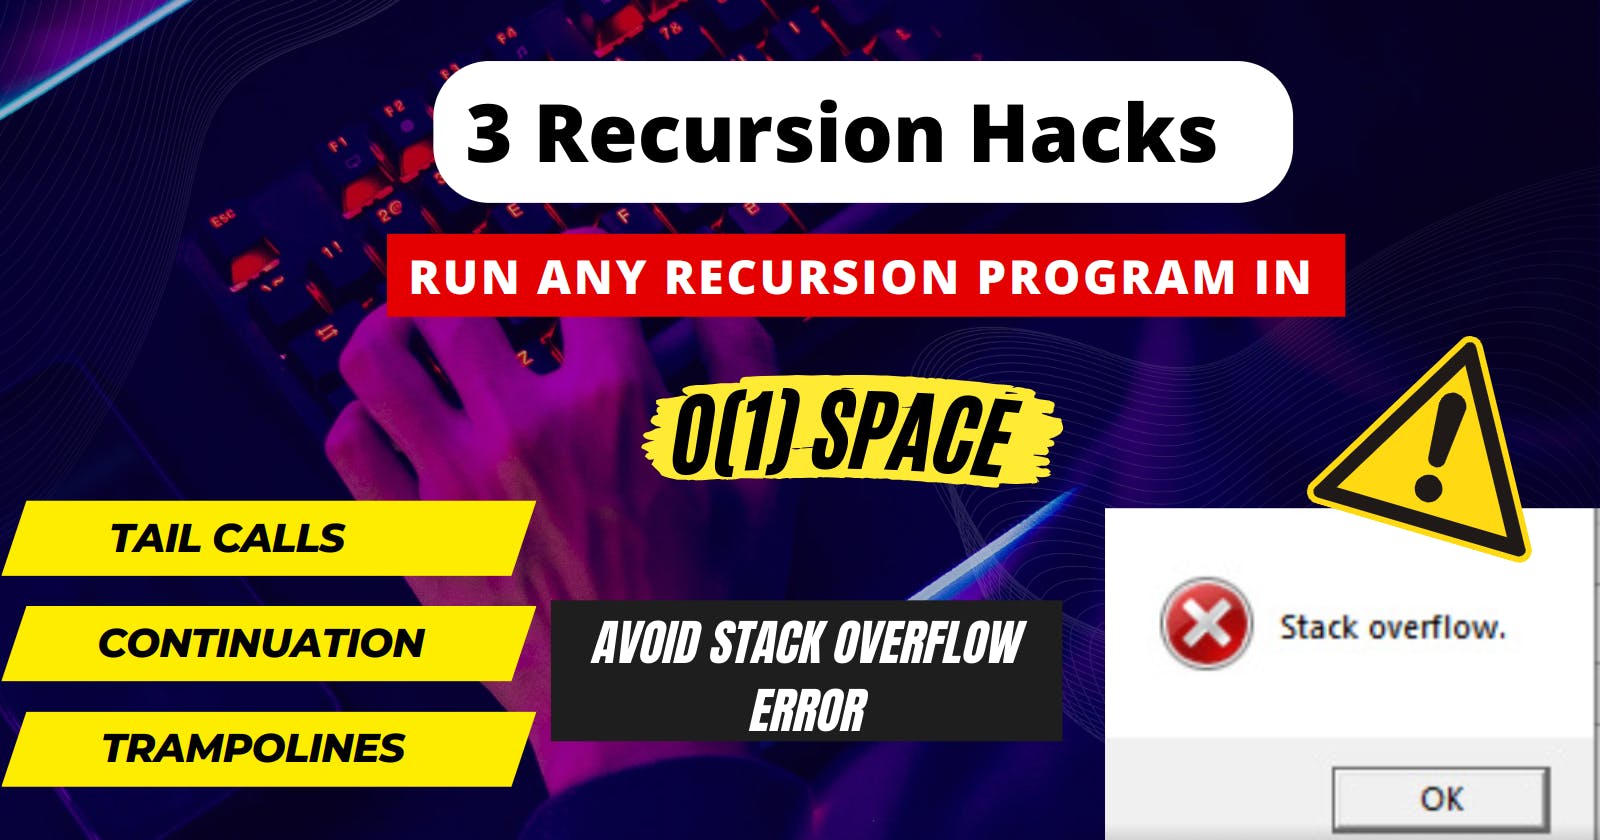 3 Recursion Hacks to Avoid Stack Overflows: Tail Calls, Continuations and Trampolines